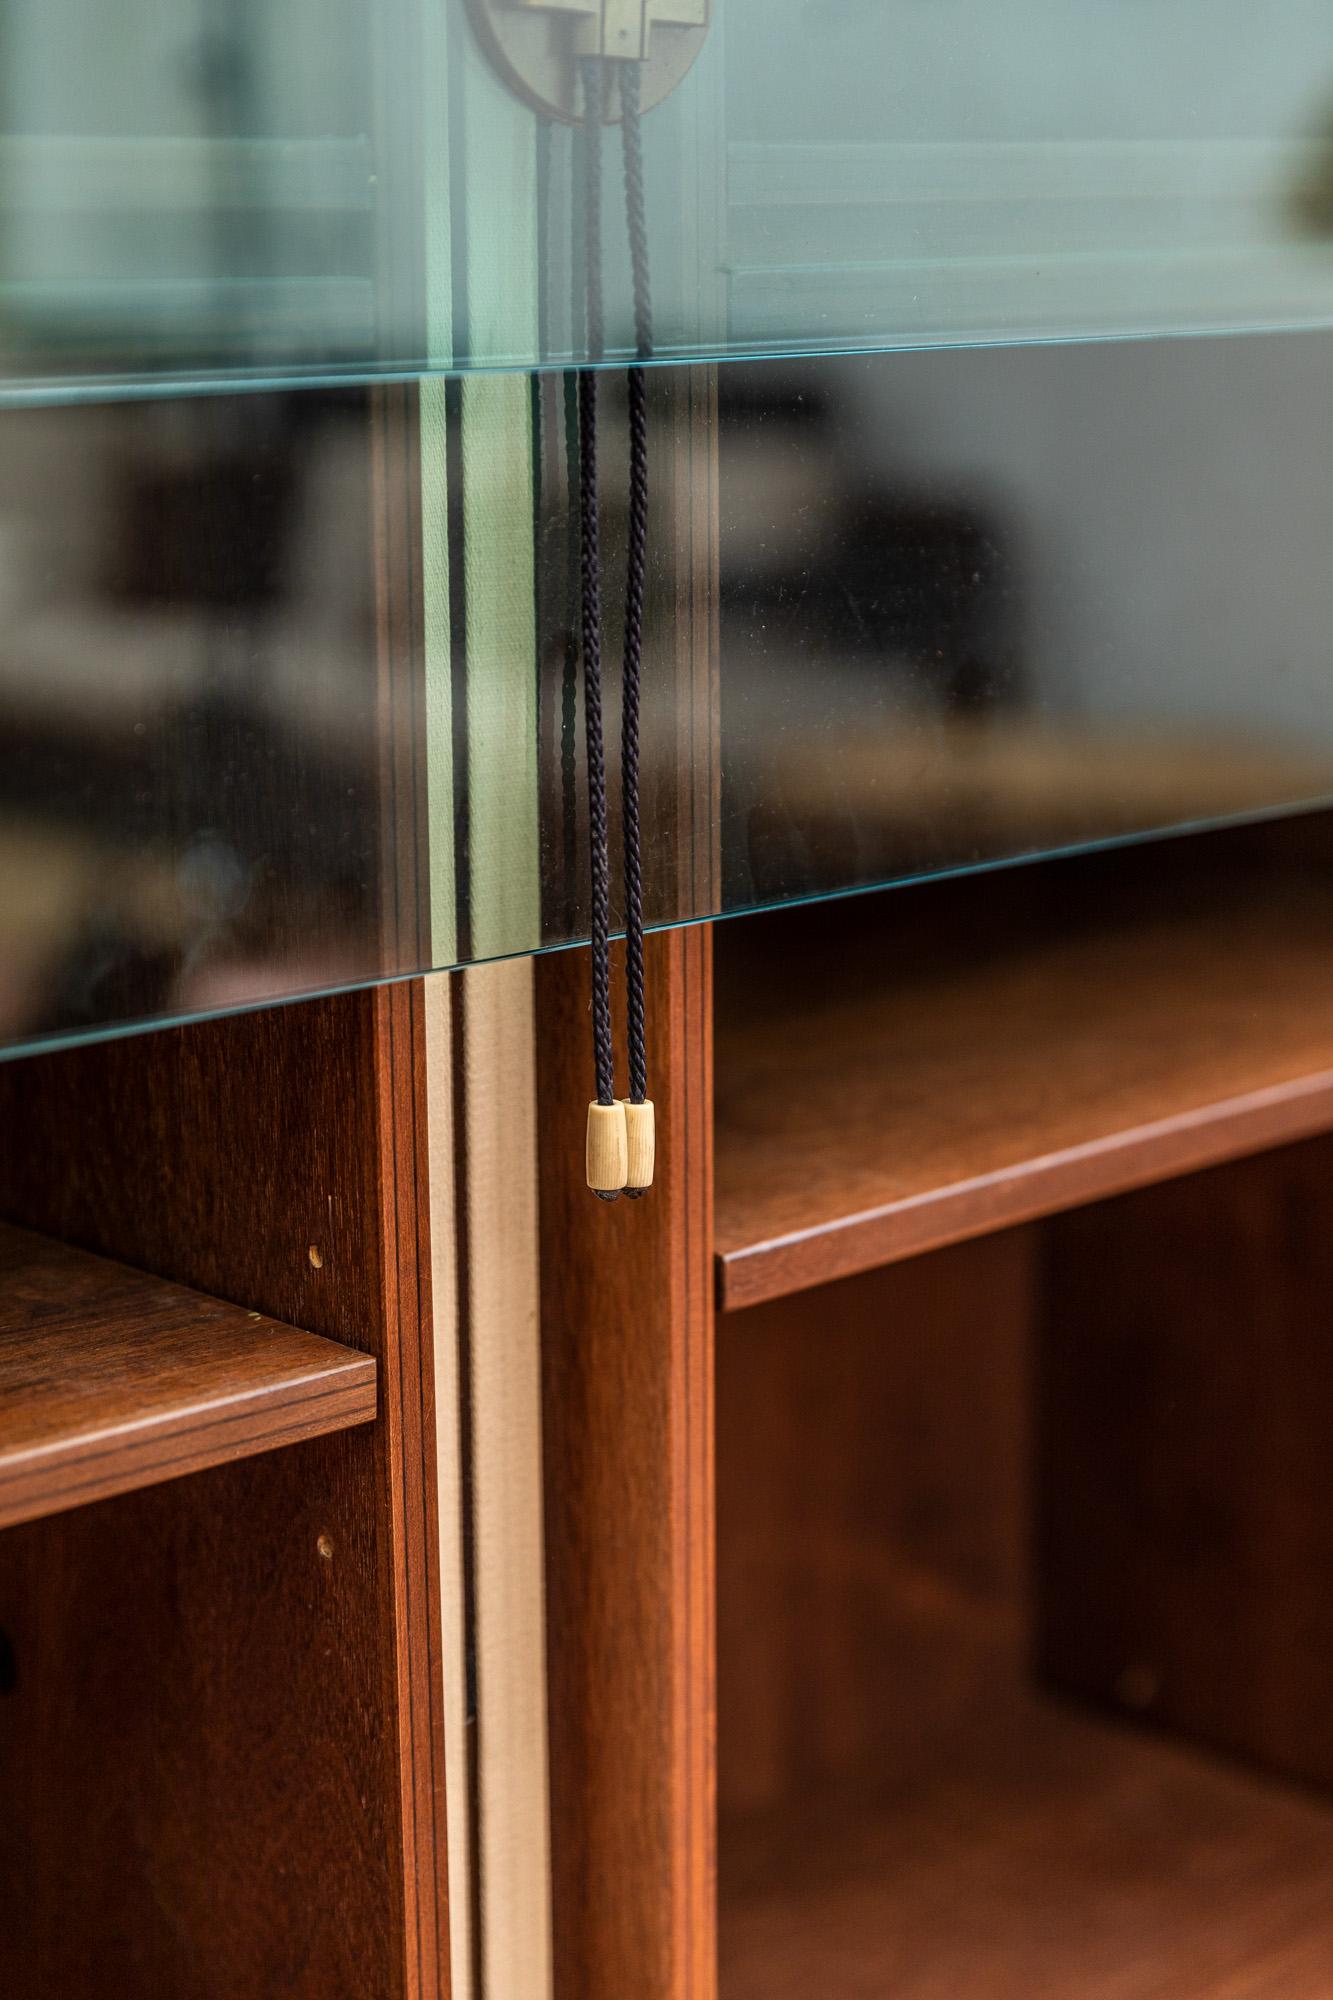 Iconic bookcases designed by Carlo Scarpa for Bernini in 1974.
Signed Bernini in brass details.
The bookcases have 3 compartments: two accessible thanks to the sliding glass by means of a counterweight, the other hinged on the bottom. 
Original